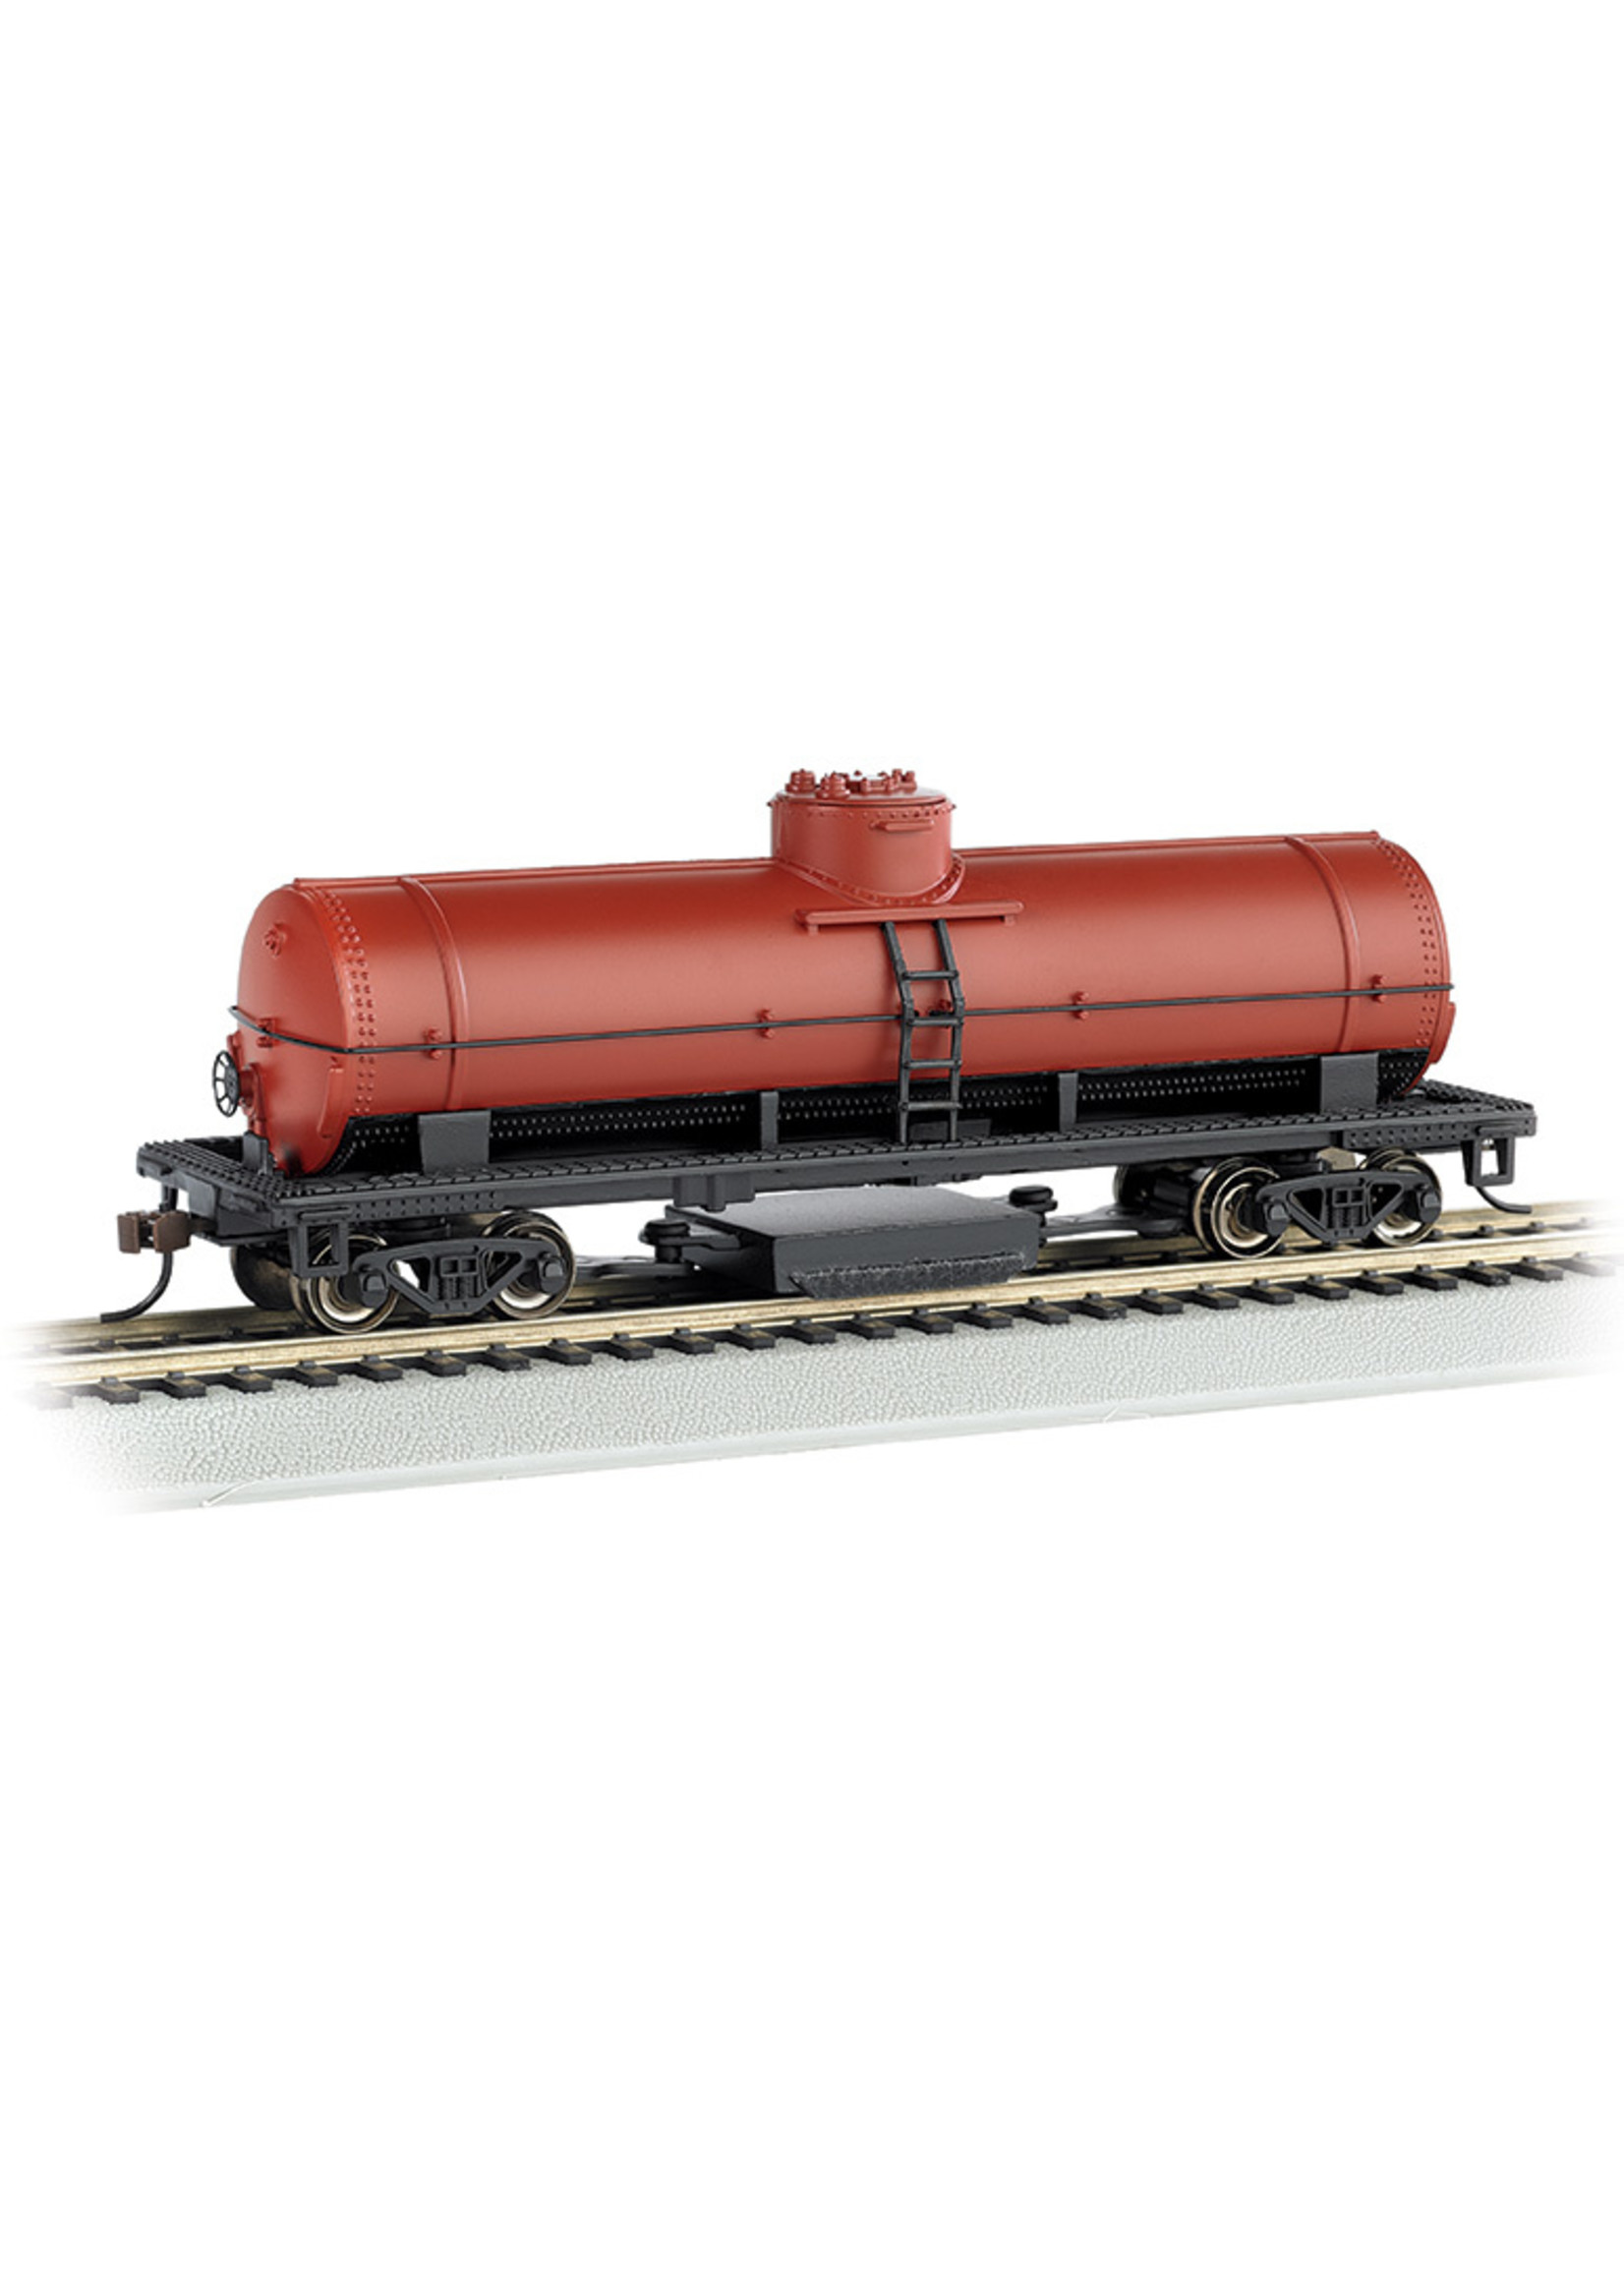 Bachmann 16303 - HO Unlettered, Oxide Red, Track-Cleaning Single-Dome Tank Car